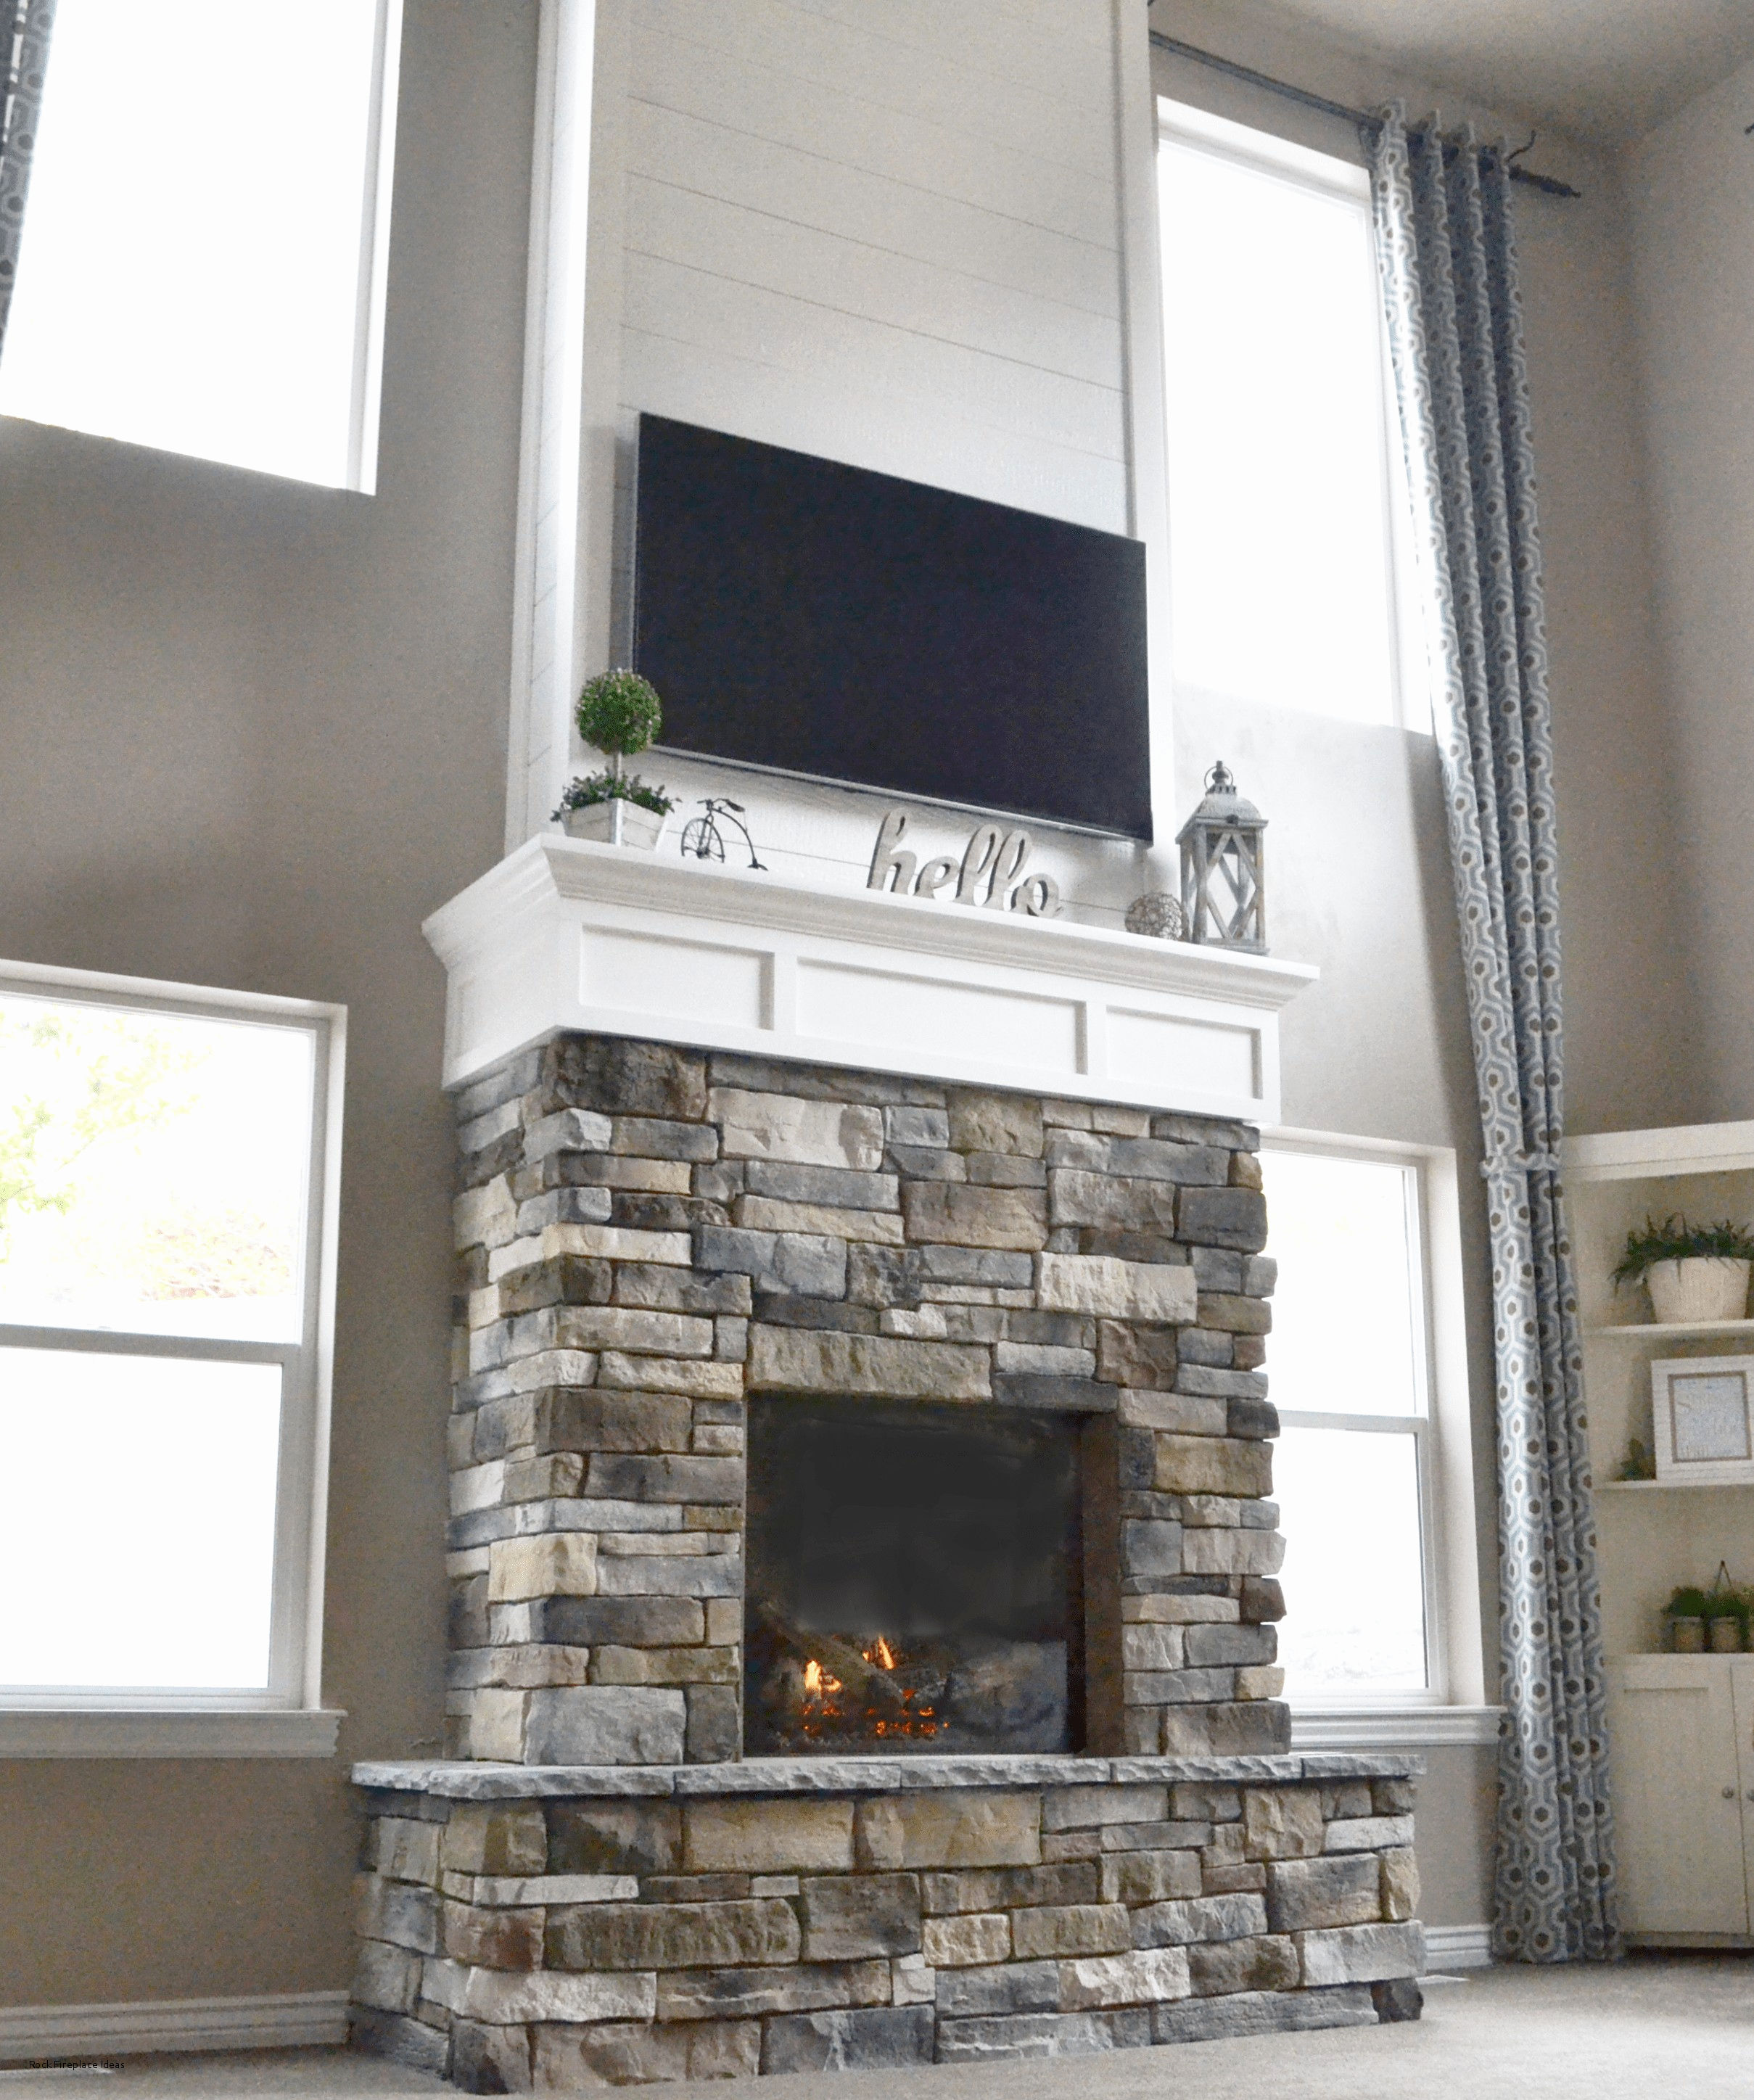 grommet curtain design with tv over fireplace and stone fireplace ideas also single hung windows plus shelves for modern living room decoration stone mantel ideas fireplace stone work ideas elegant fi